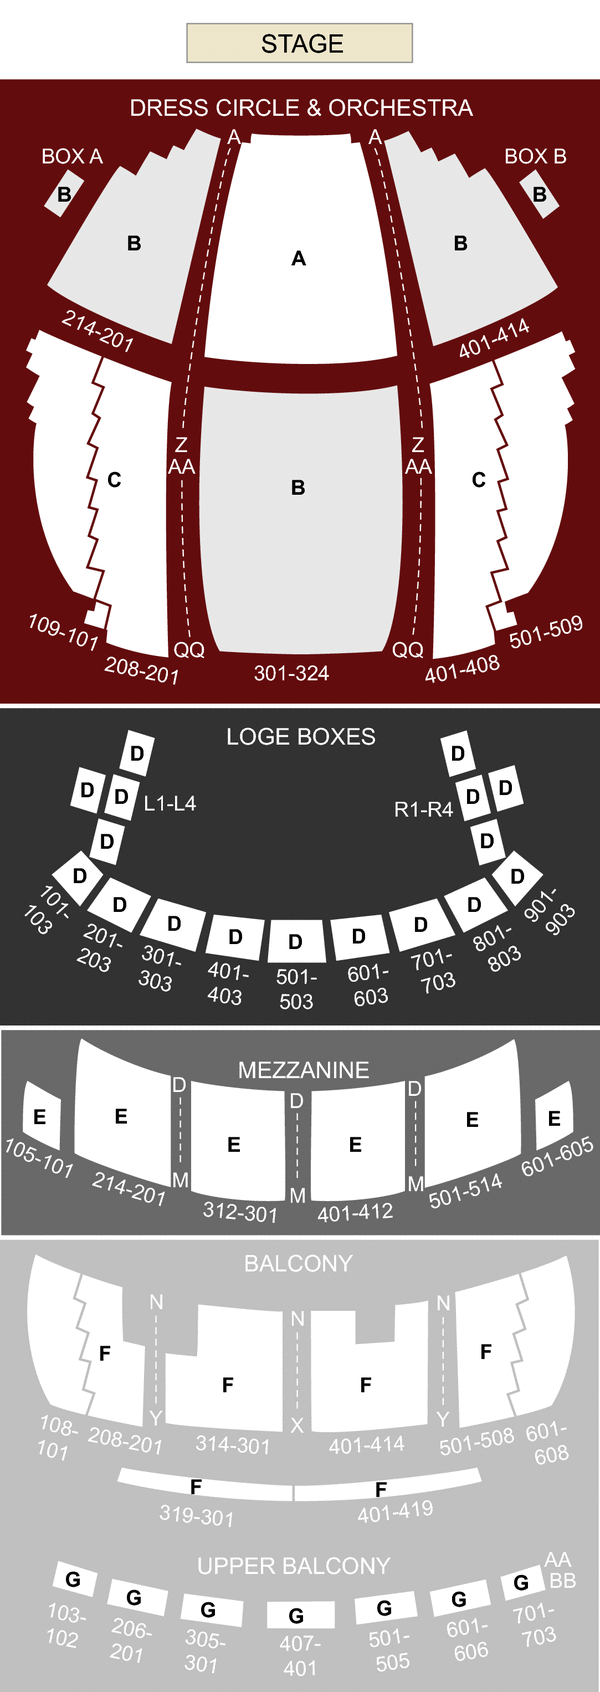 Palace Theater at Playhouse Square Cleveland, OH seating chart and stage